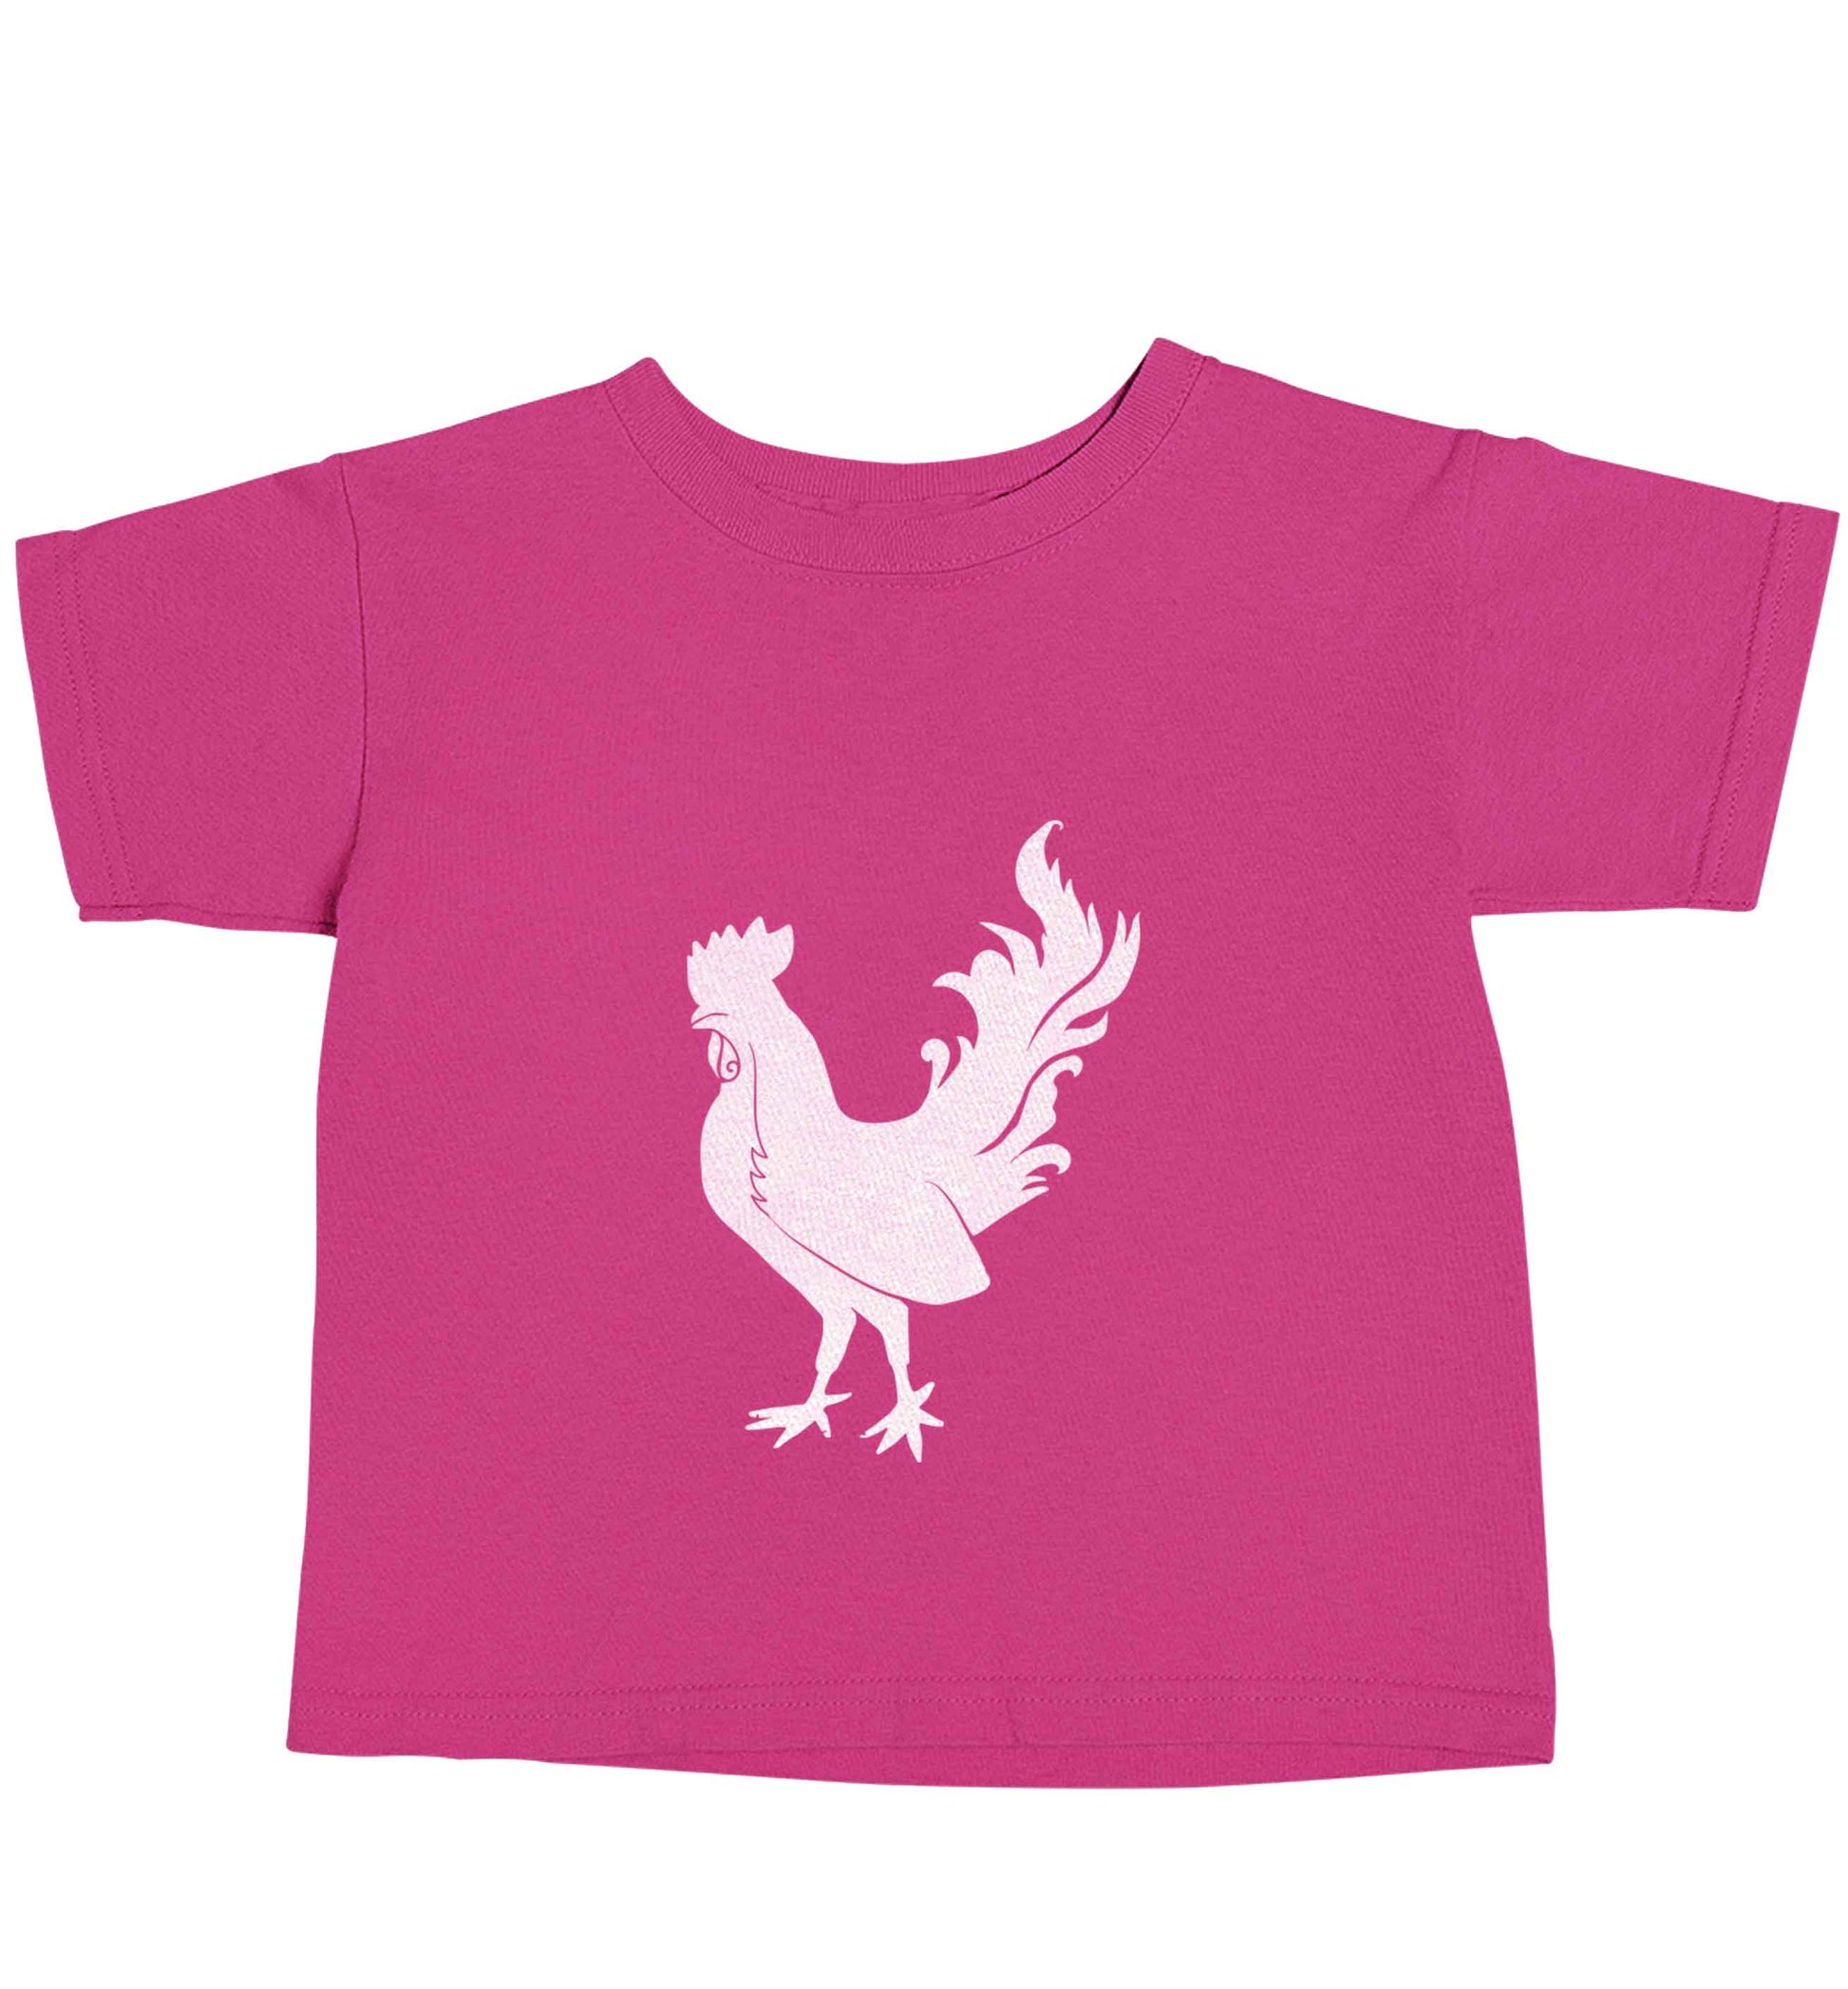 Rooster pink baby toddler Tshirt 2 Years